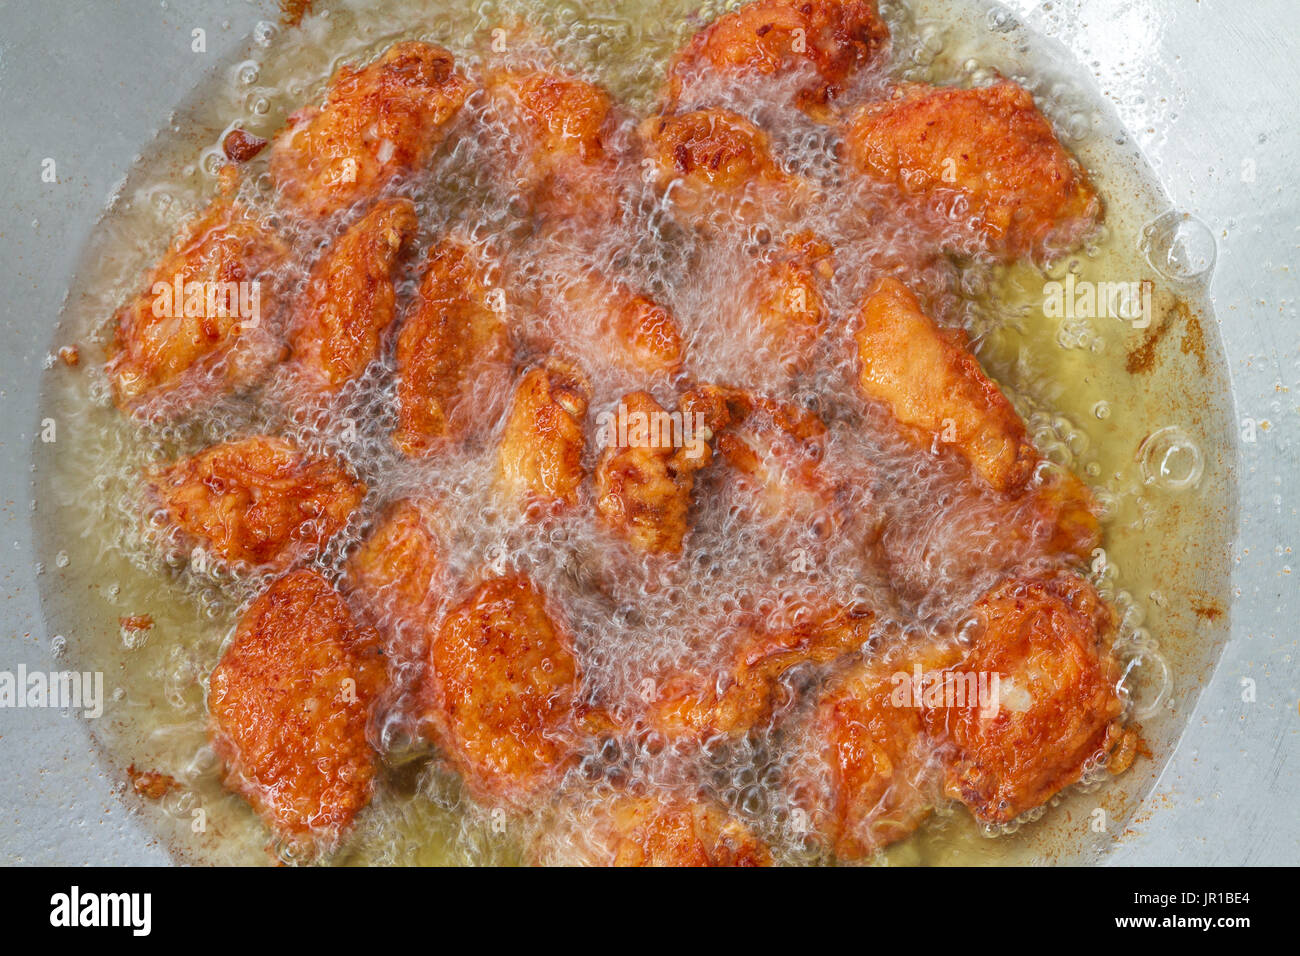 Fried Chicken, Fried Foods Stock Photo